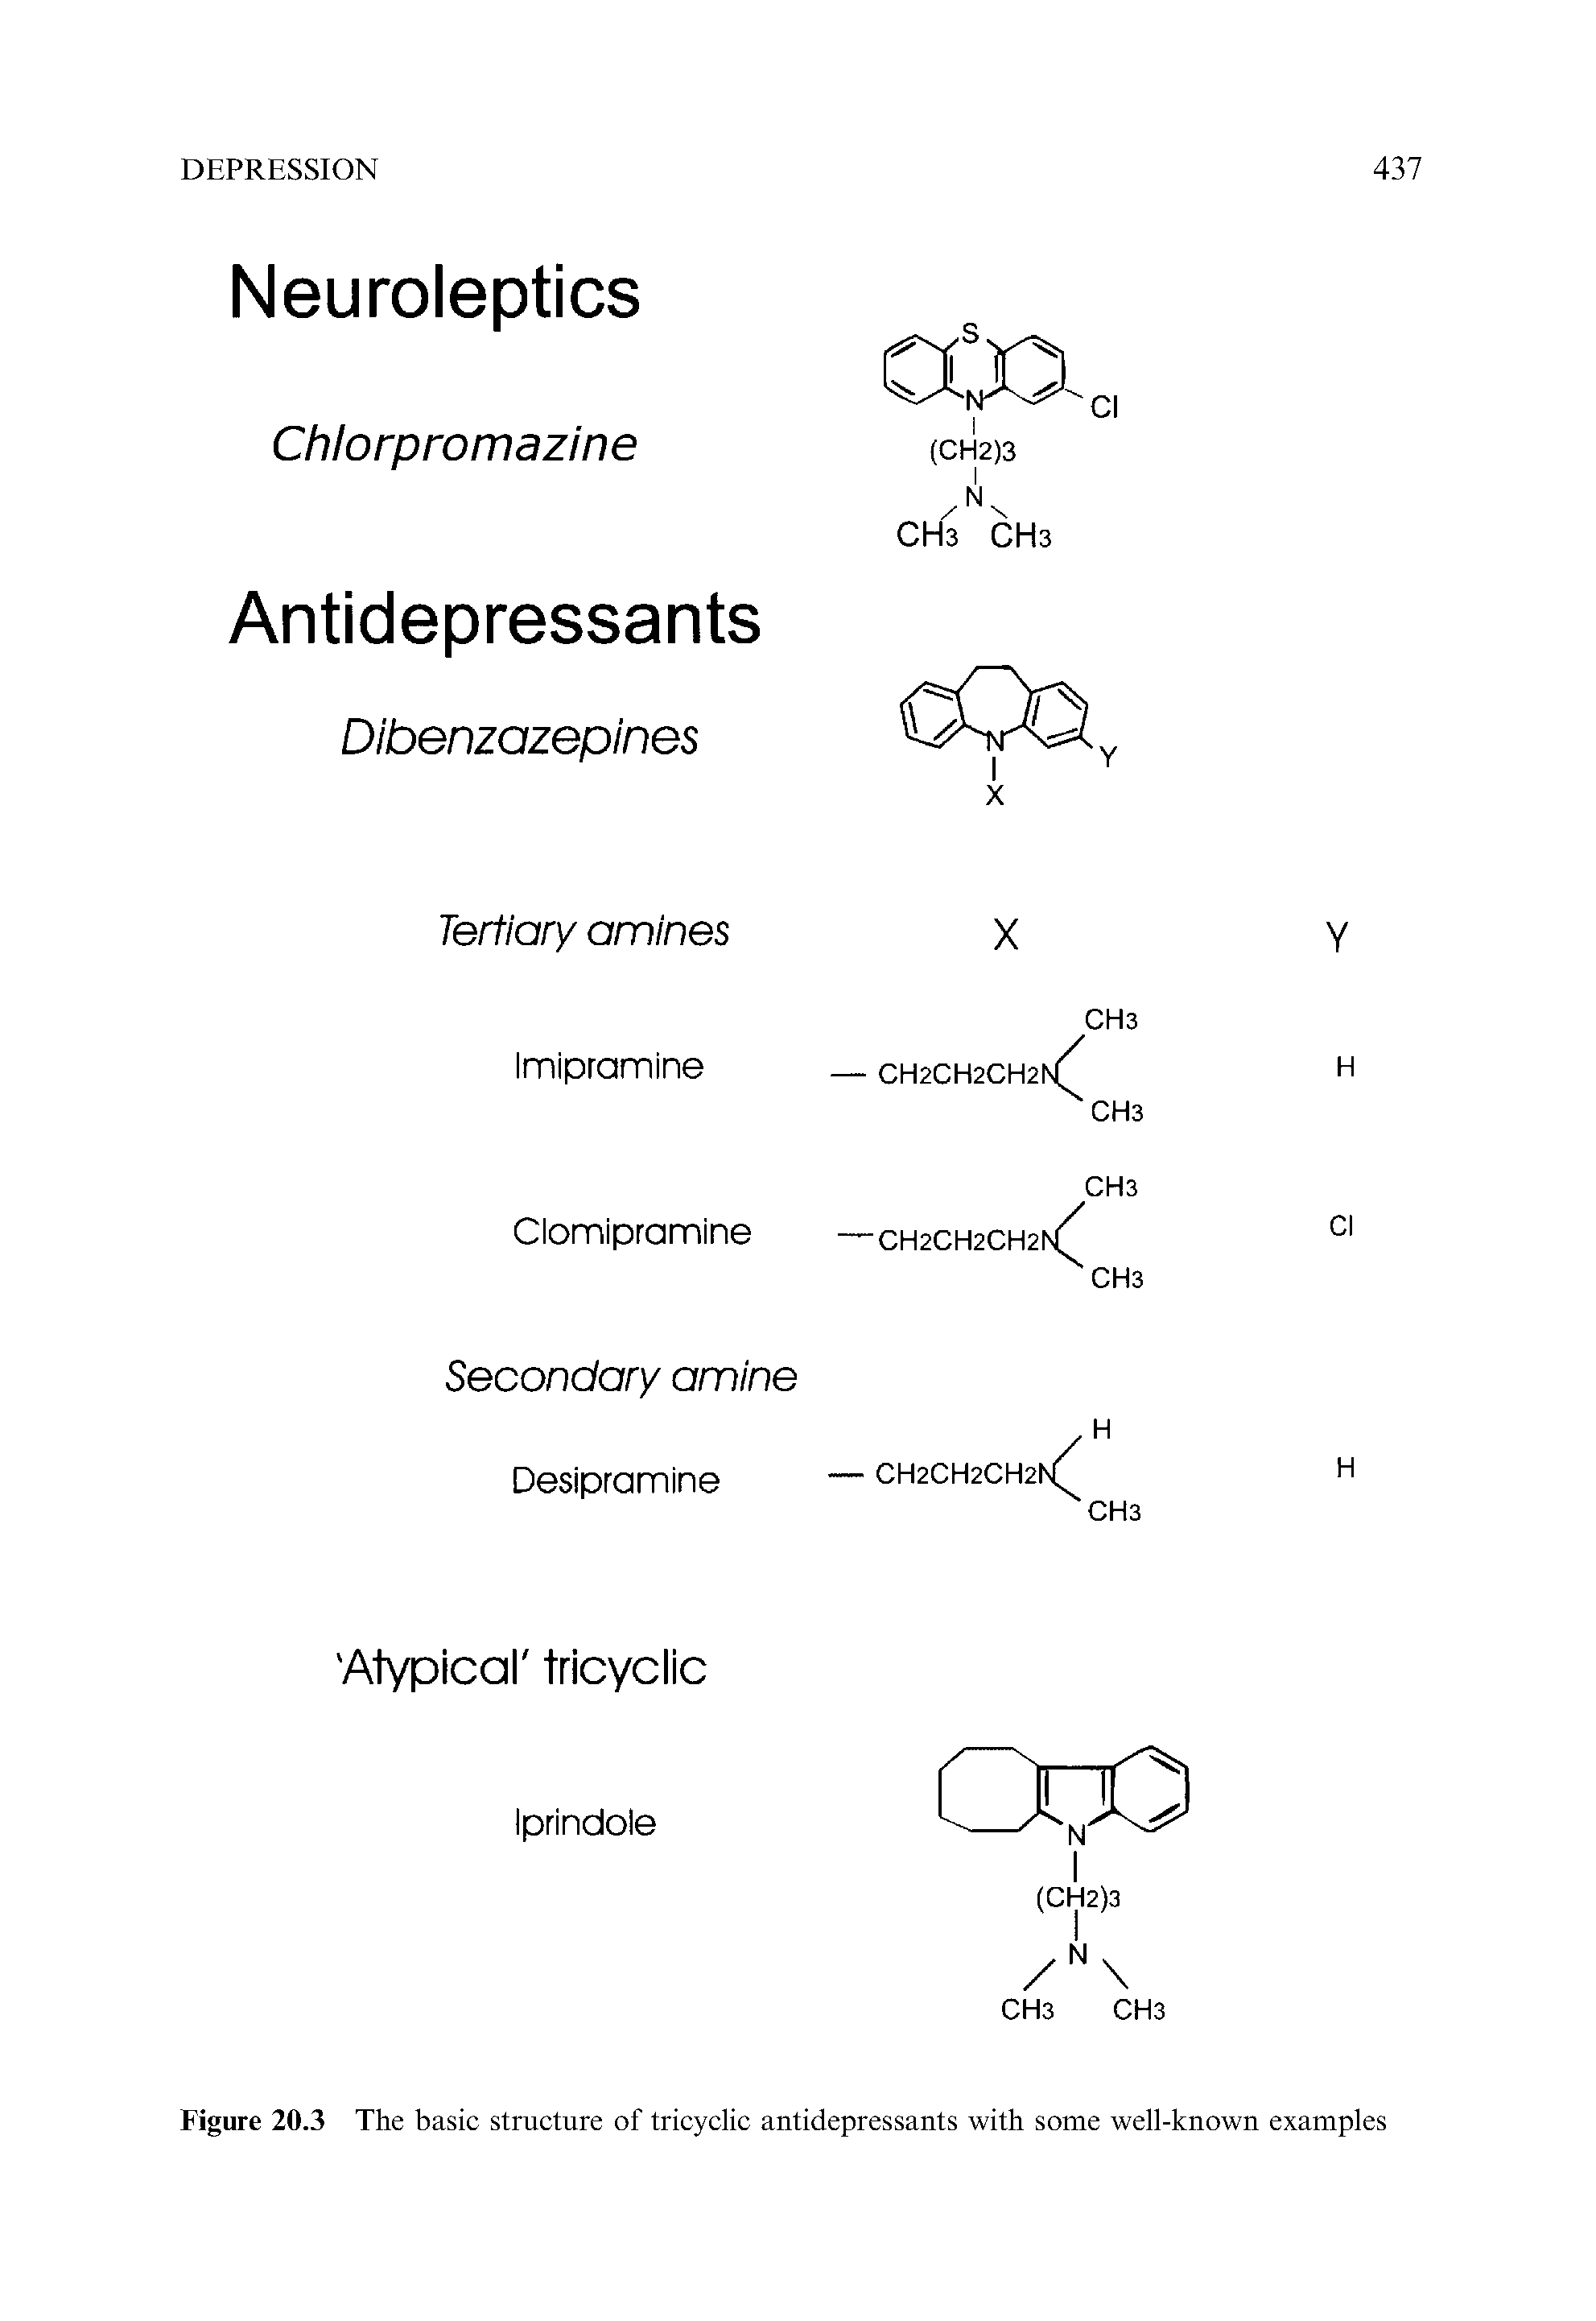 Figure 20.3 The basic structure of tricyclic antidepressants with some well-known examples...